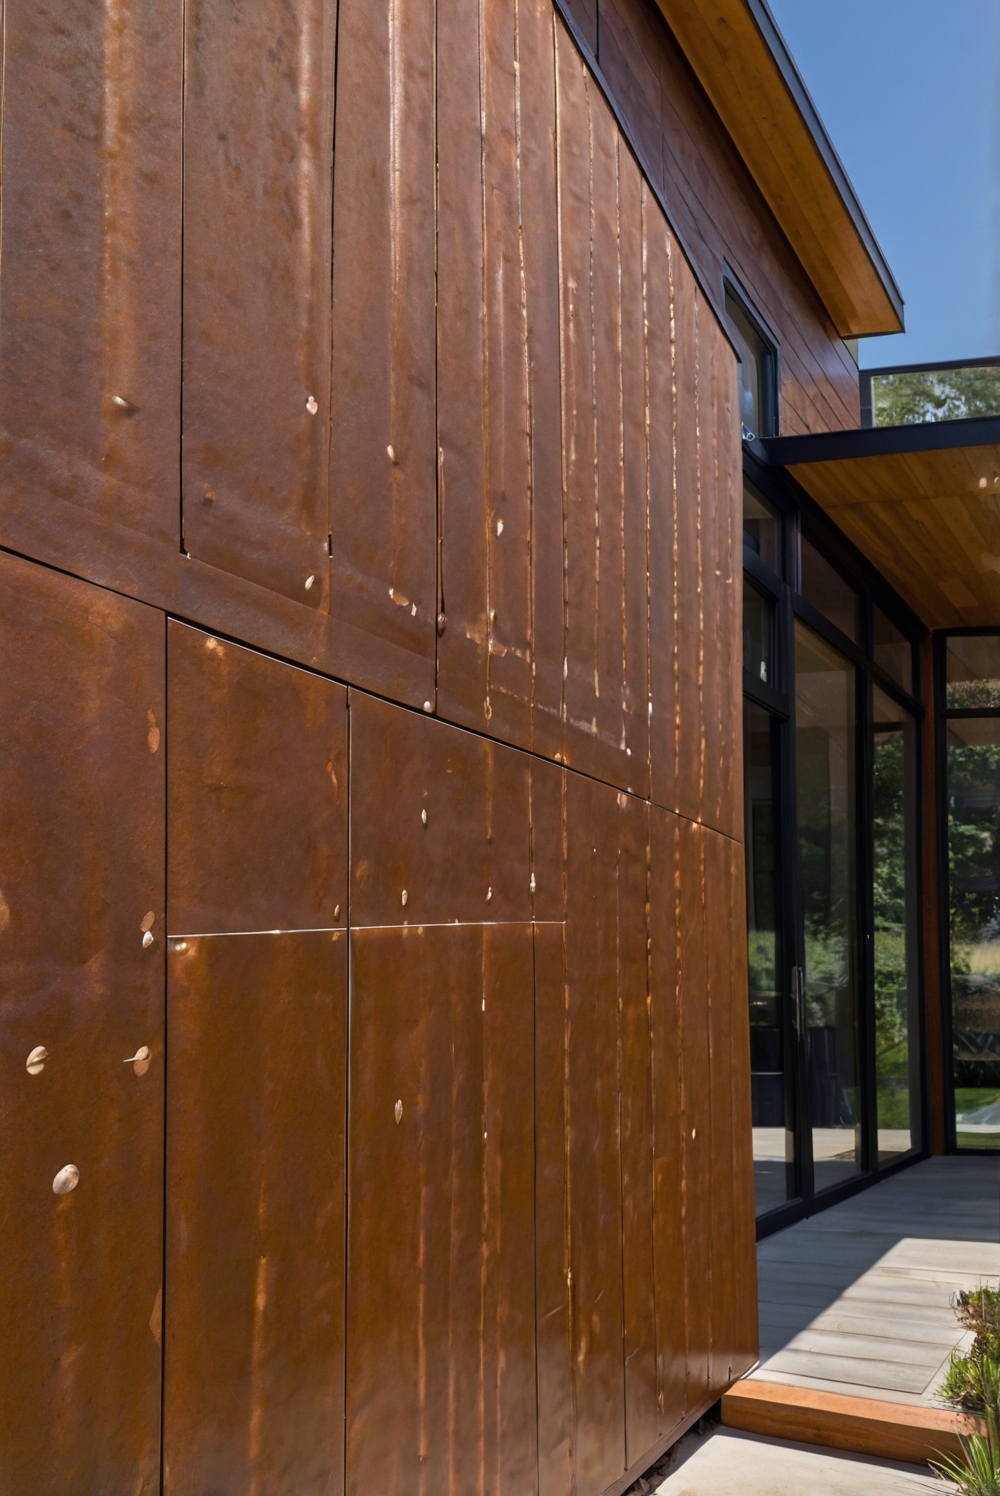 Incorporating Corten Siding for a Rustic Look (Add Rustic Charm with Corten Siding)